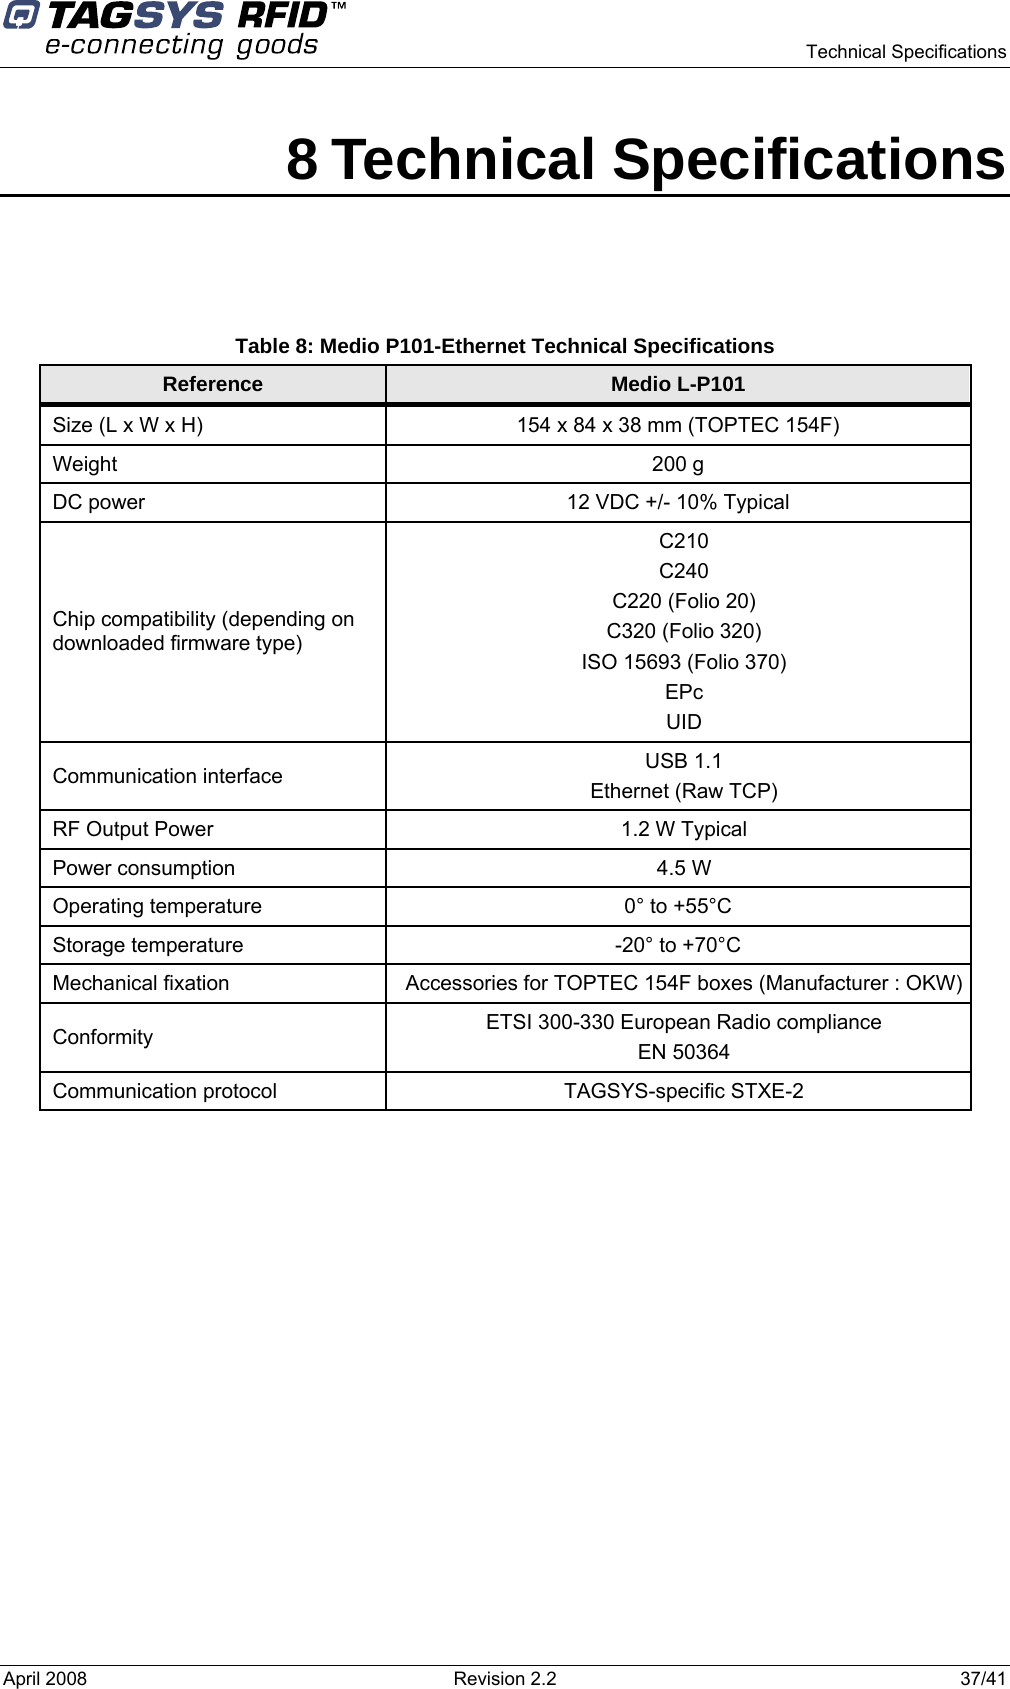    Technical Specifications  April 2008  Revision 2.2  37/41 8 Technical Specifications   Table 8: Medio P101-Ethernet Technical Specifications Reference  Medio L-P101 Size (L x W x H)  154 x 84 x 38 mm (TOPTEC 154F) Weight 200 g DC power  12 VDC +/- 10% Typical Chip compatibility (depending on downloaded firmware type) C210 C240 C220 (Folio 20) C320 (Folio 320) ISO 15693 (Folio 370) EPc UID Communication interface  USB 1.1 Ethernet (Raw TCP) RF Output Power  1.2 W Typical Power consumption   4.5 W Operating temperature  0° to +55°C Storage temperature  -20° to +70°C Mechanical fixation  Accessories for TOPTEC 154F boxes (Manufacturer : OKW)Conformity  ETSI 300-330 European Radio compliance EN 50364 Communication protocol  TAGSYS-specific STXE-2    